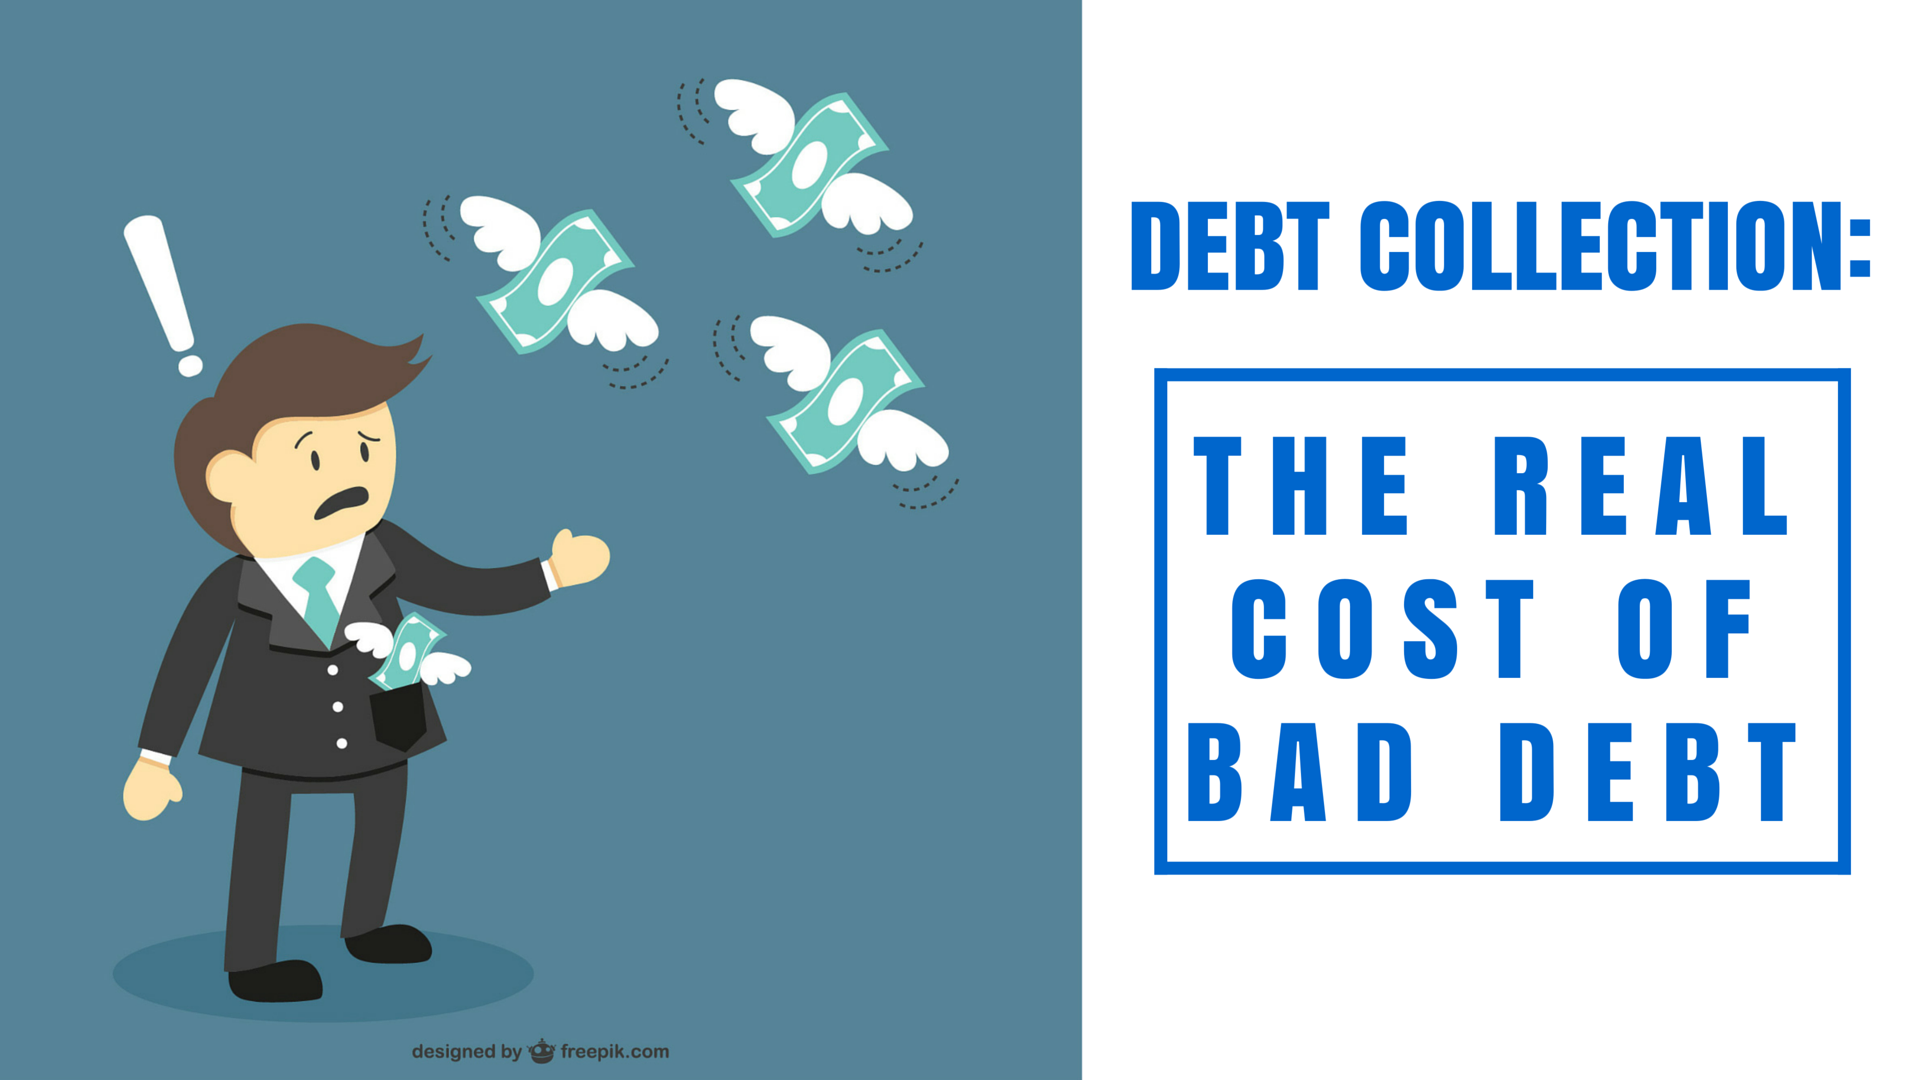 Debt collection: the real cost of bad debt